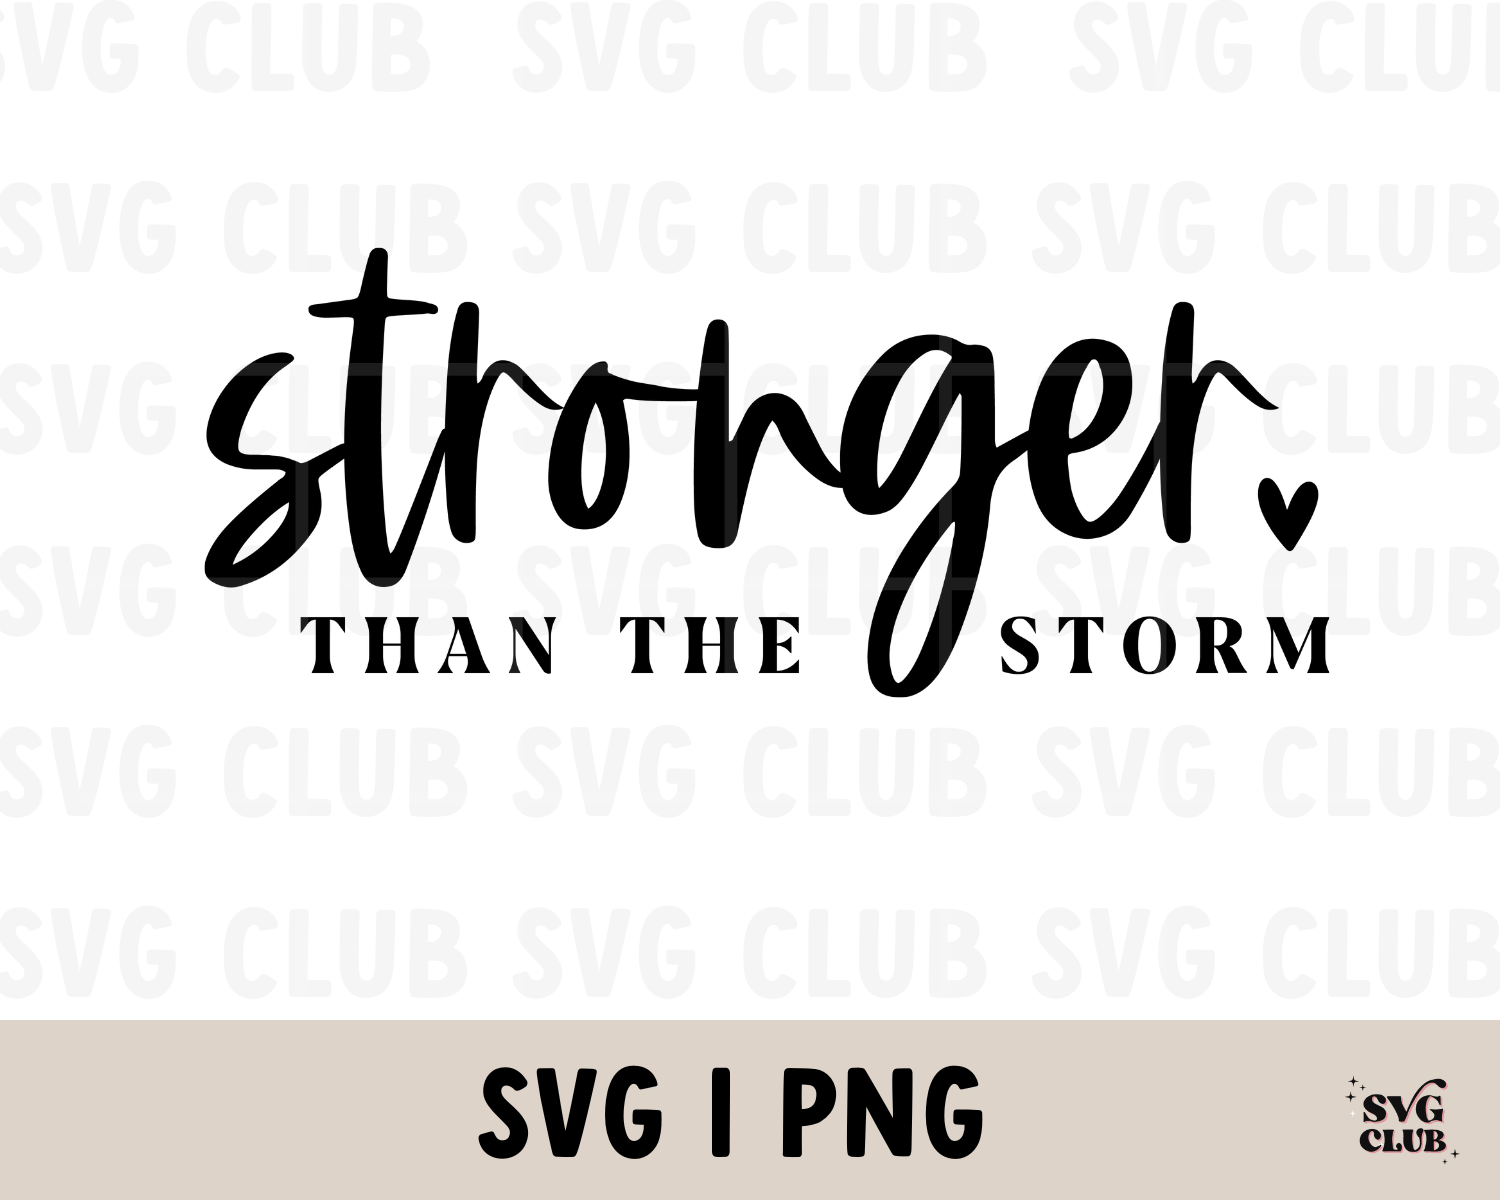 Stronger Than Yesterday SVG/PNG – SVG Club